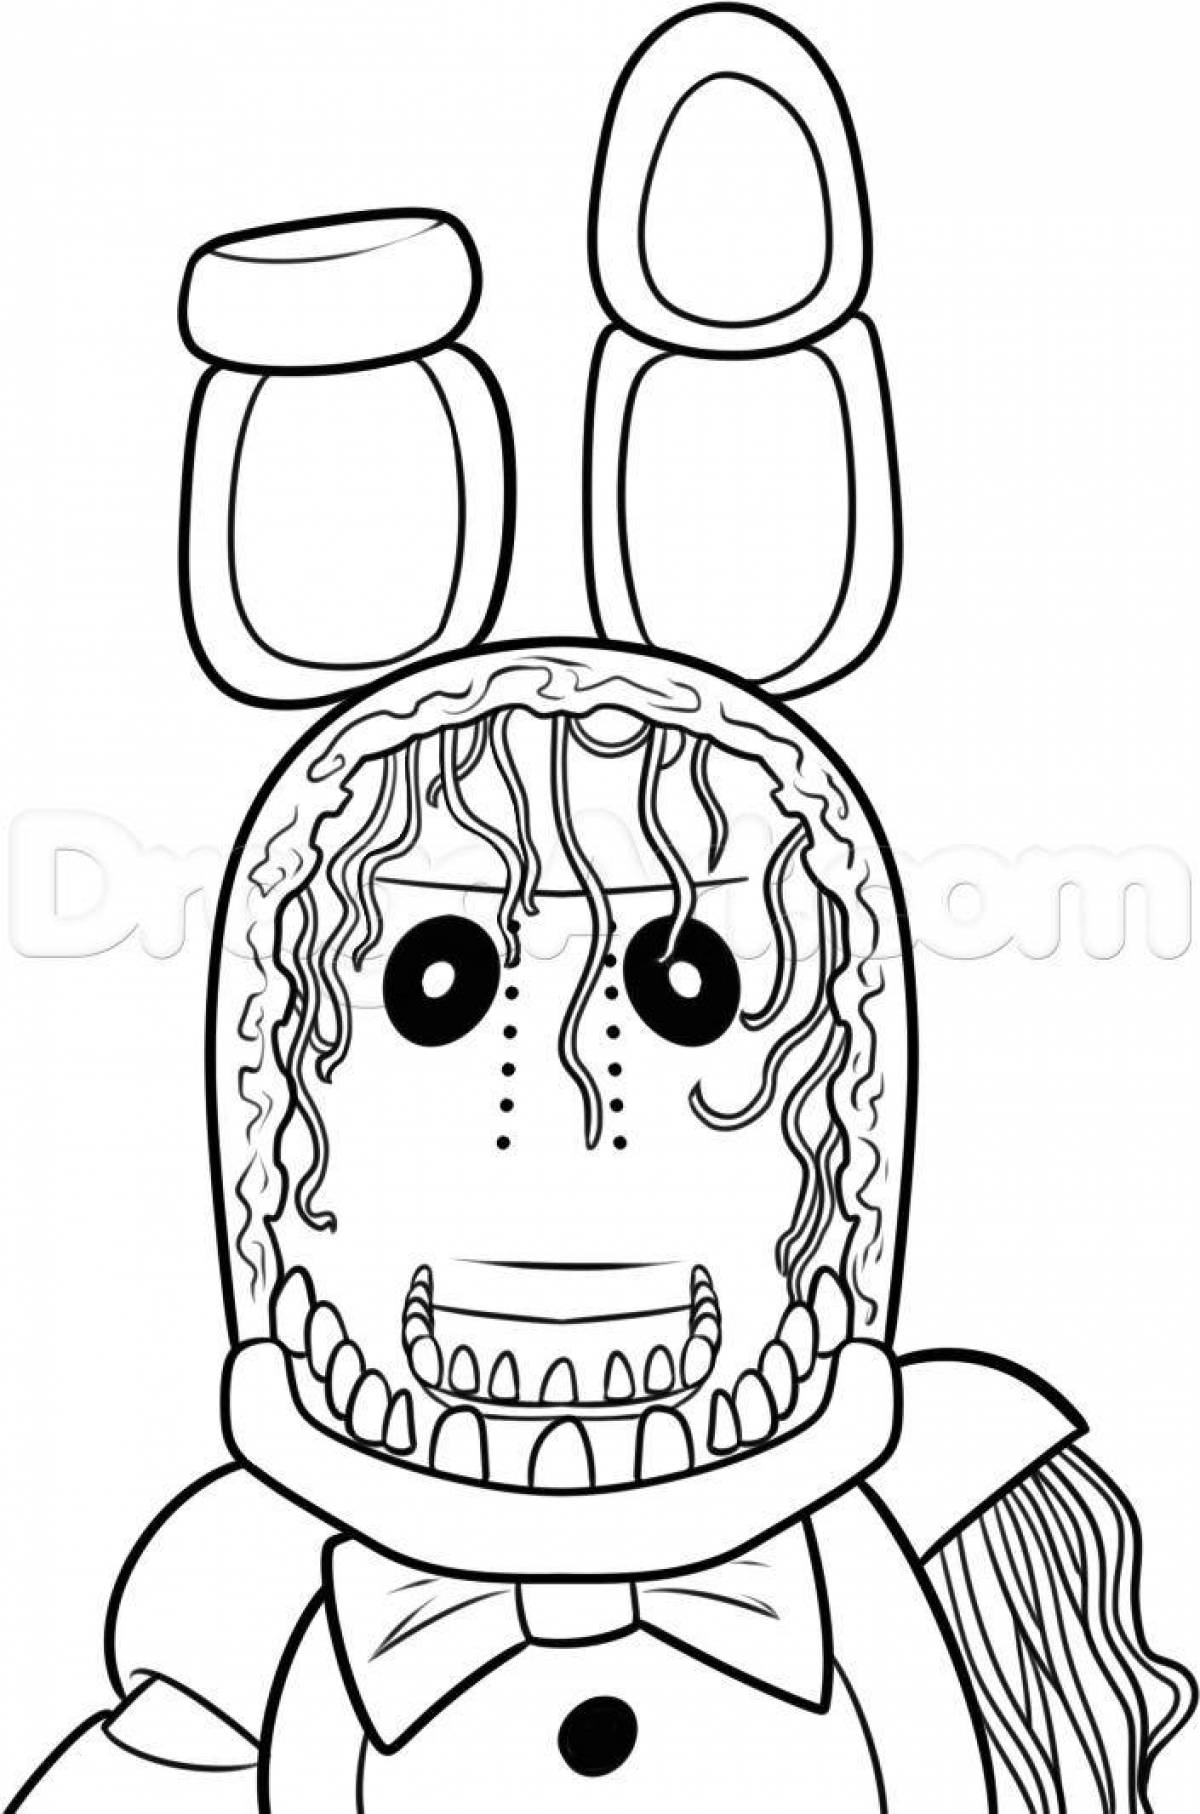 Animated bonnie coloring page